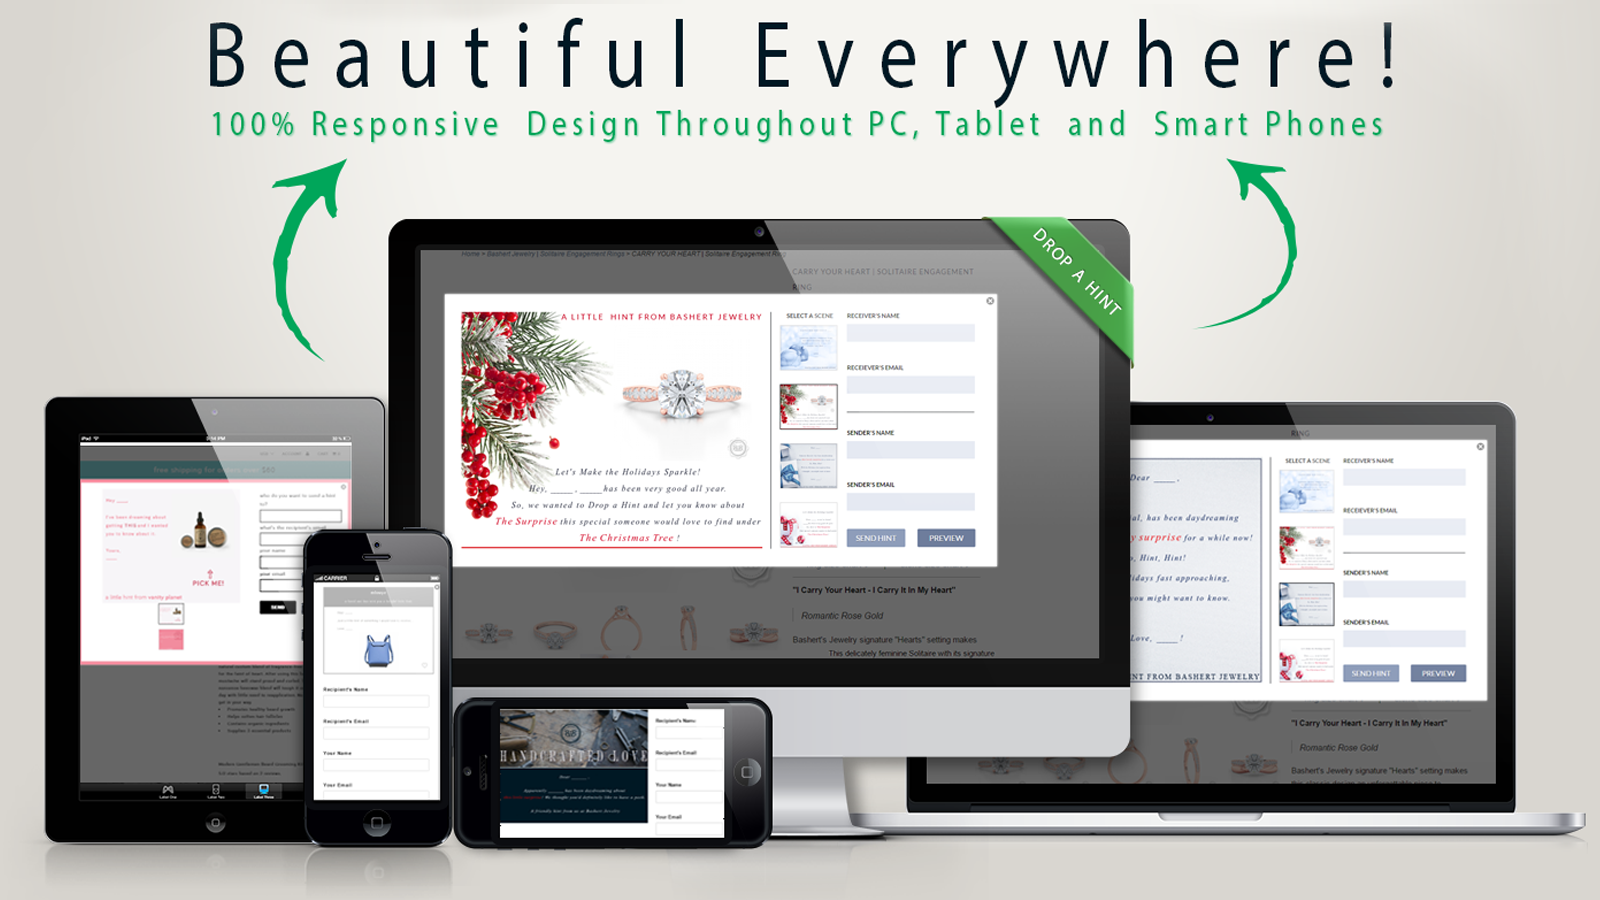 100% Responsive, our app is beautiful everywhere. PC, Tablets or